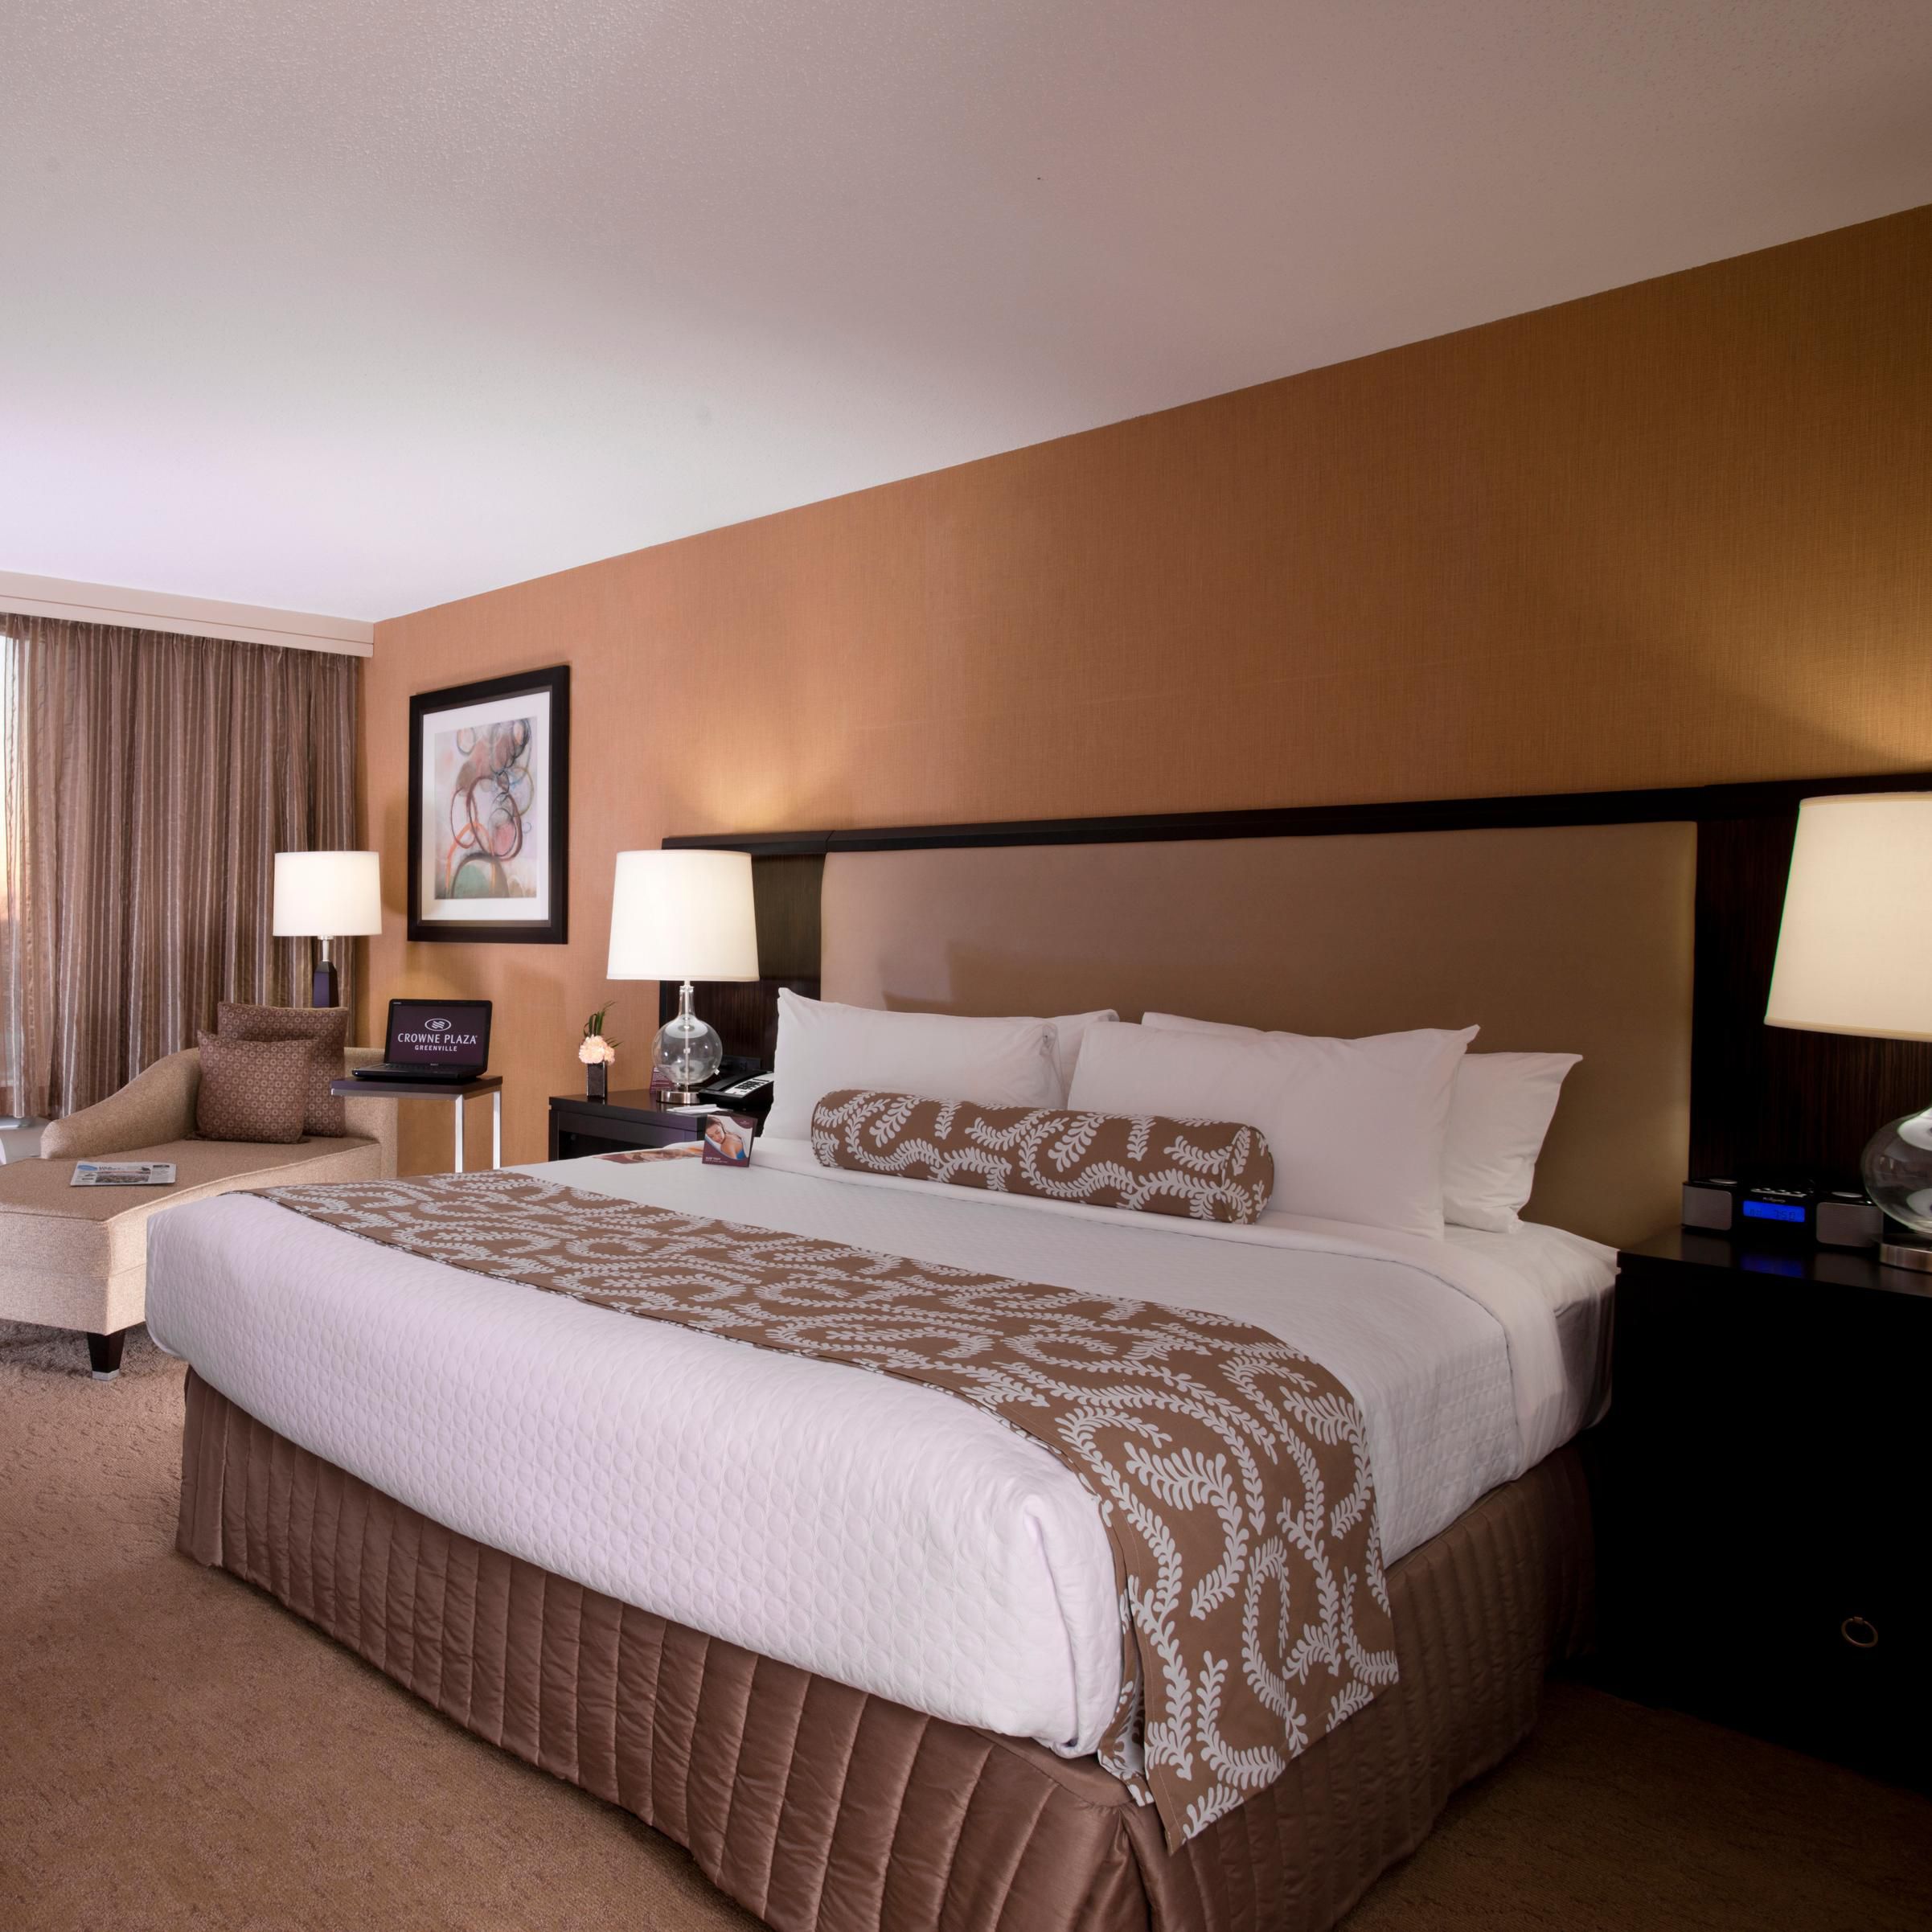 Enjoy a King bed after a concert at Bon Secours Area!